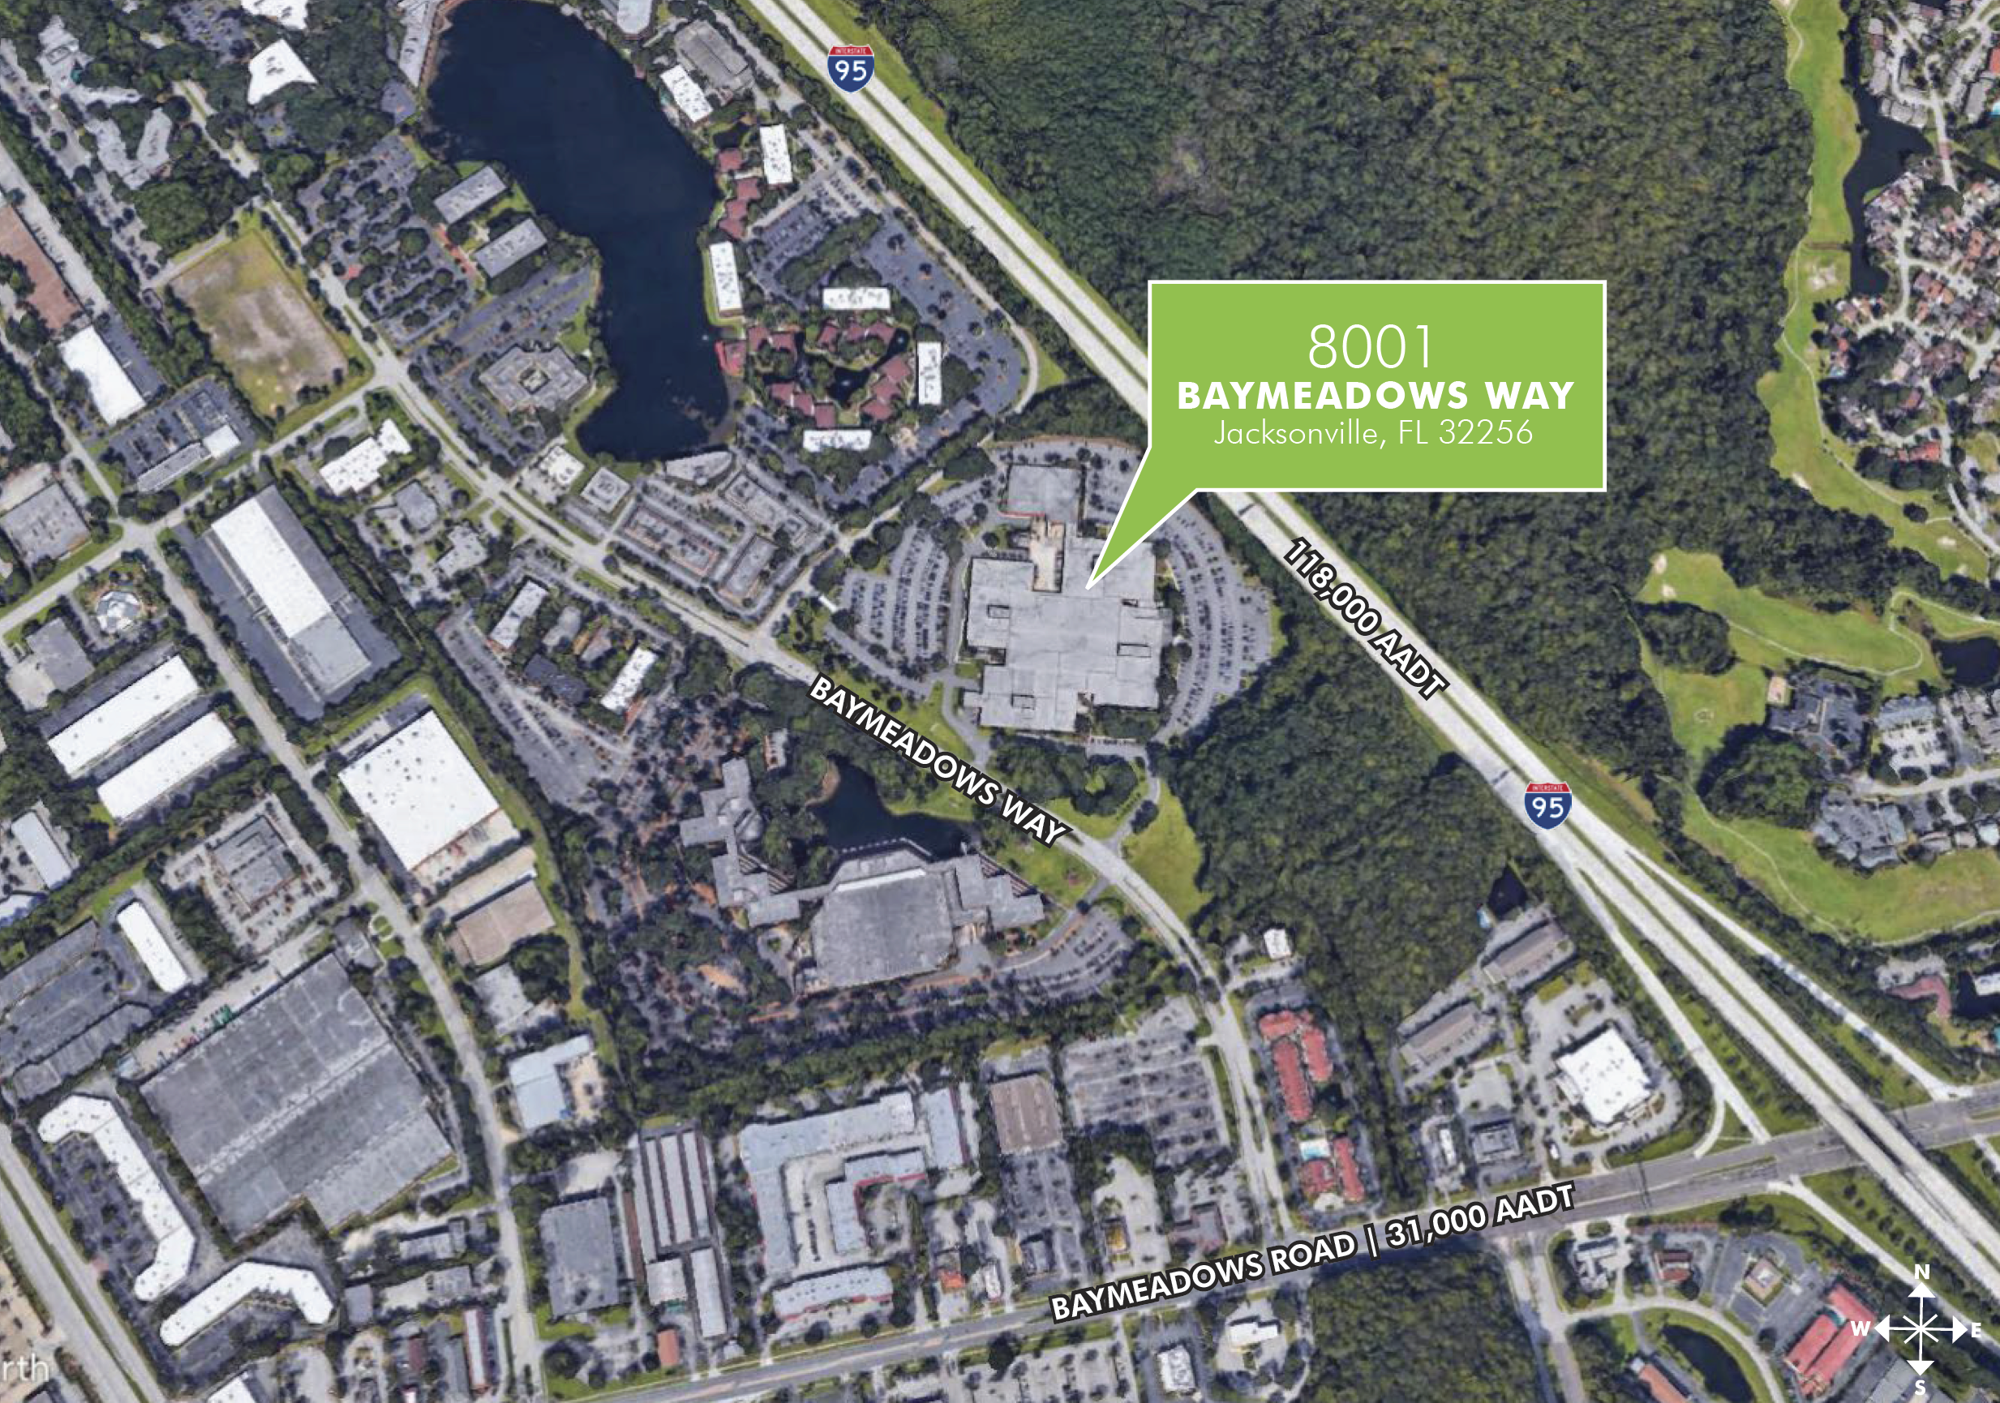 The map of 8001 Baymeadows Way from the CBRE brochure marketing the property.